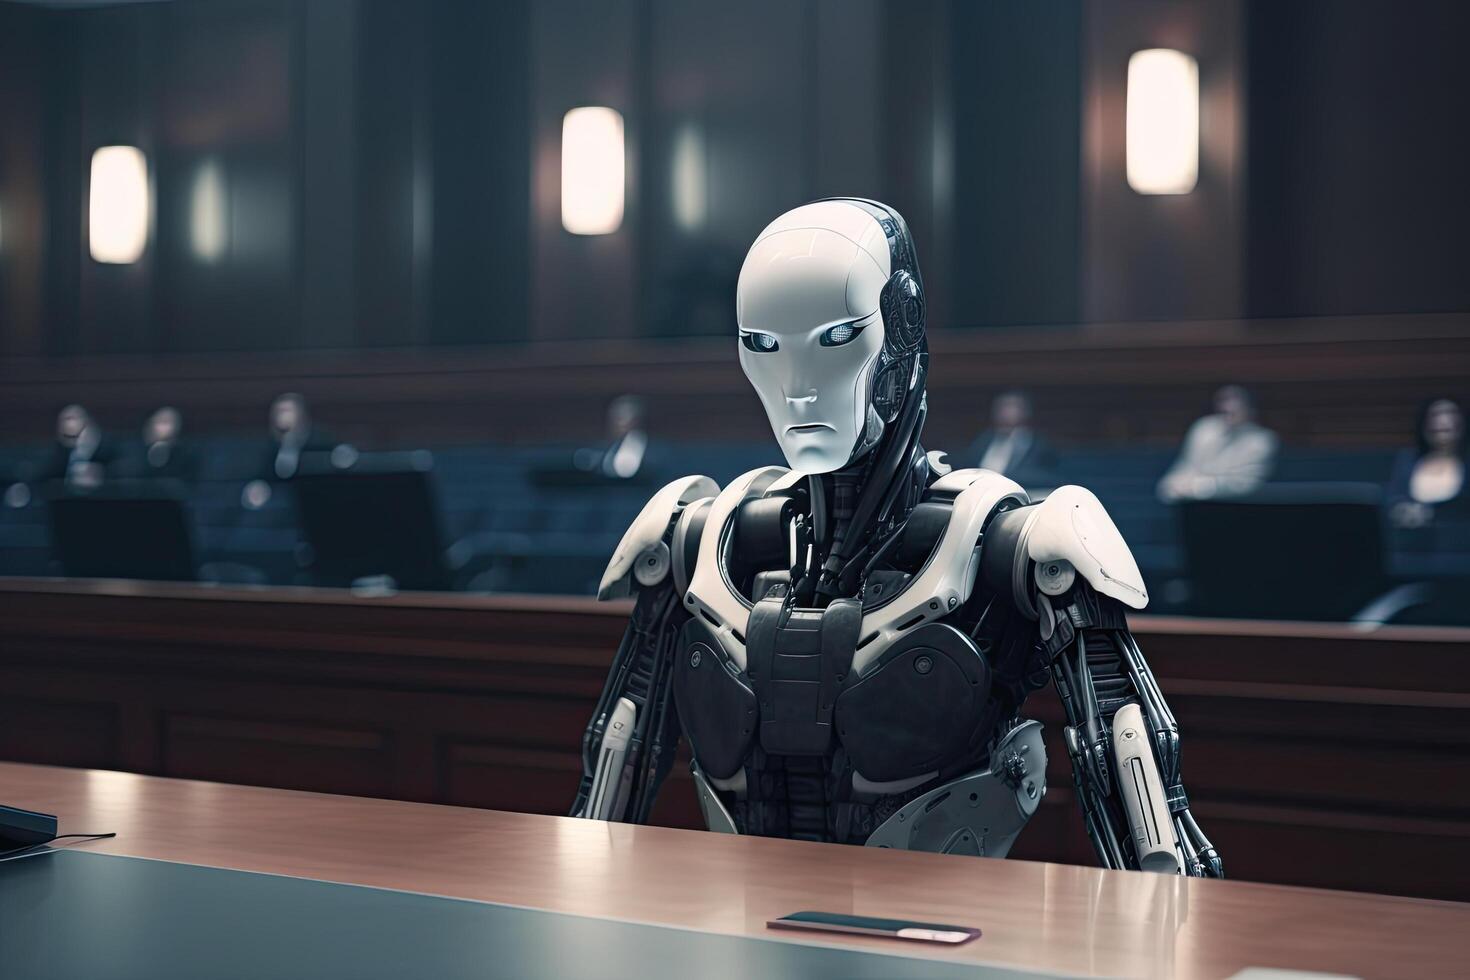 Humanoid robot sitting at the table in a courtroom or law enforcement office, A futuristic AI robot judge in a courthouse, photo